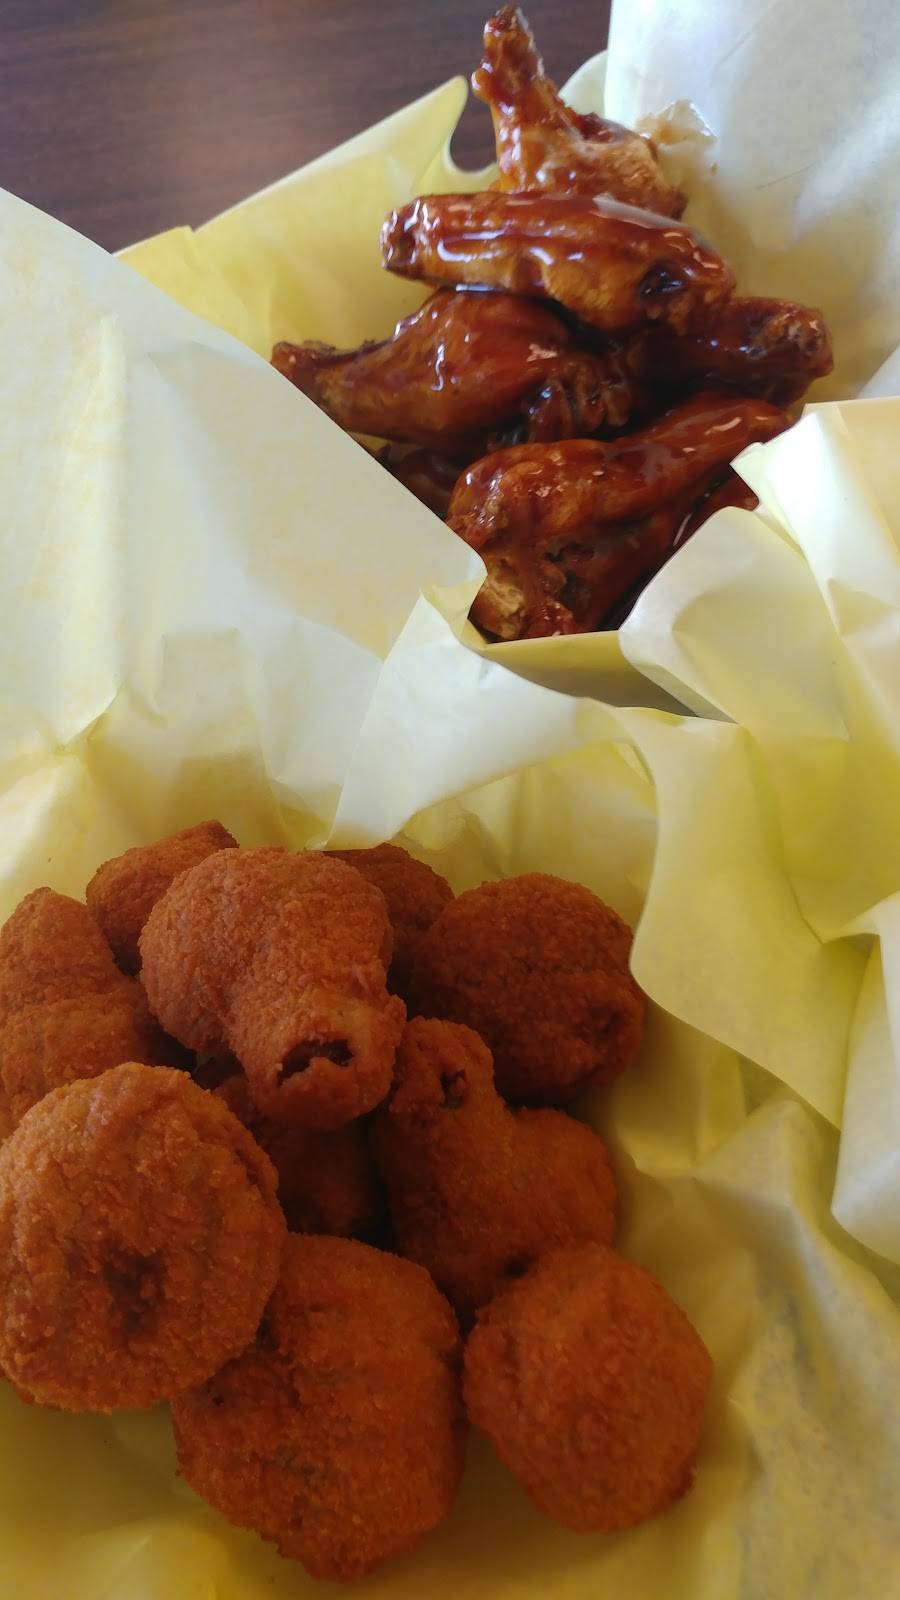 Jimmys Wings | restaurant | 2050 Youngfield St, Lakewood, CO 80215, USA | 3032380454 OR +1 303-238-0454